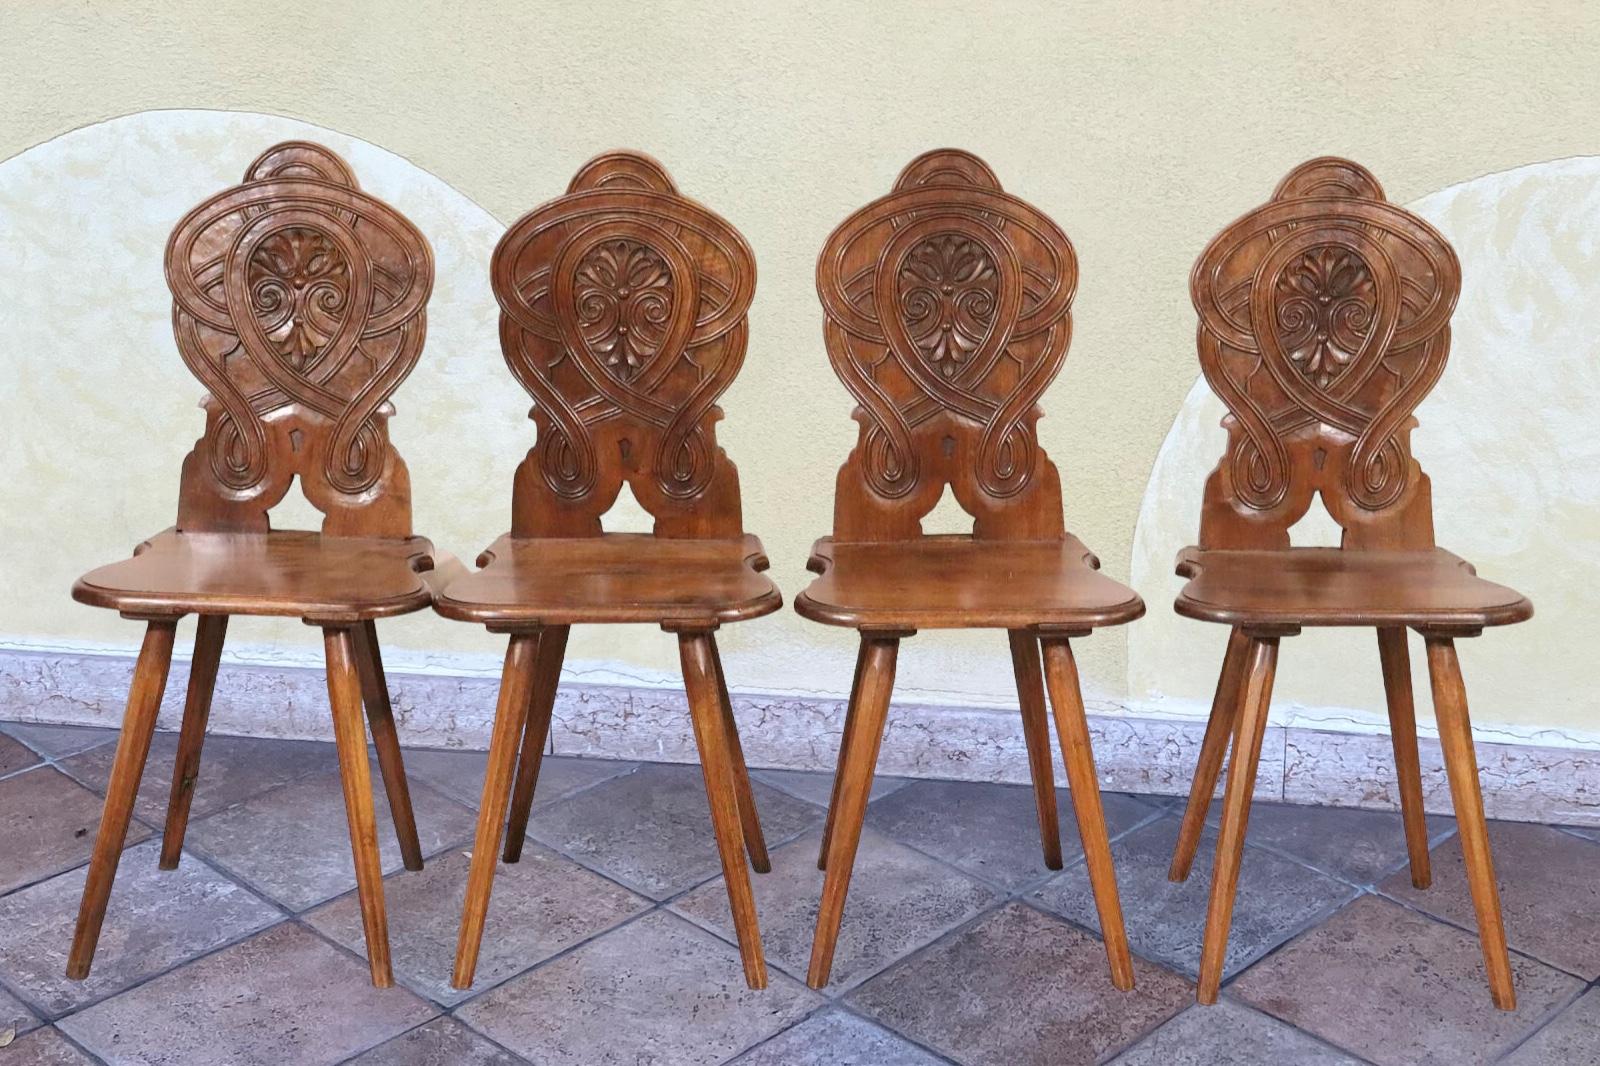 A set of four interesting brutalist wood carved from the Bavarian Alps or Black Forest Area , with a motif adorning all chair Backrests. Each Stool is in very good, used condition, the backrests and legs are maybe a bit wobbly, that comes from the